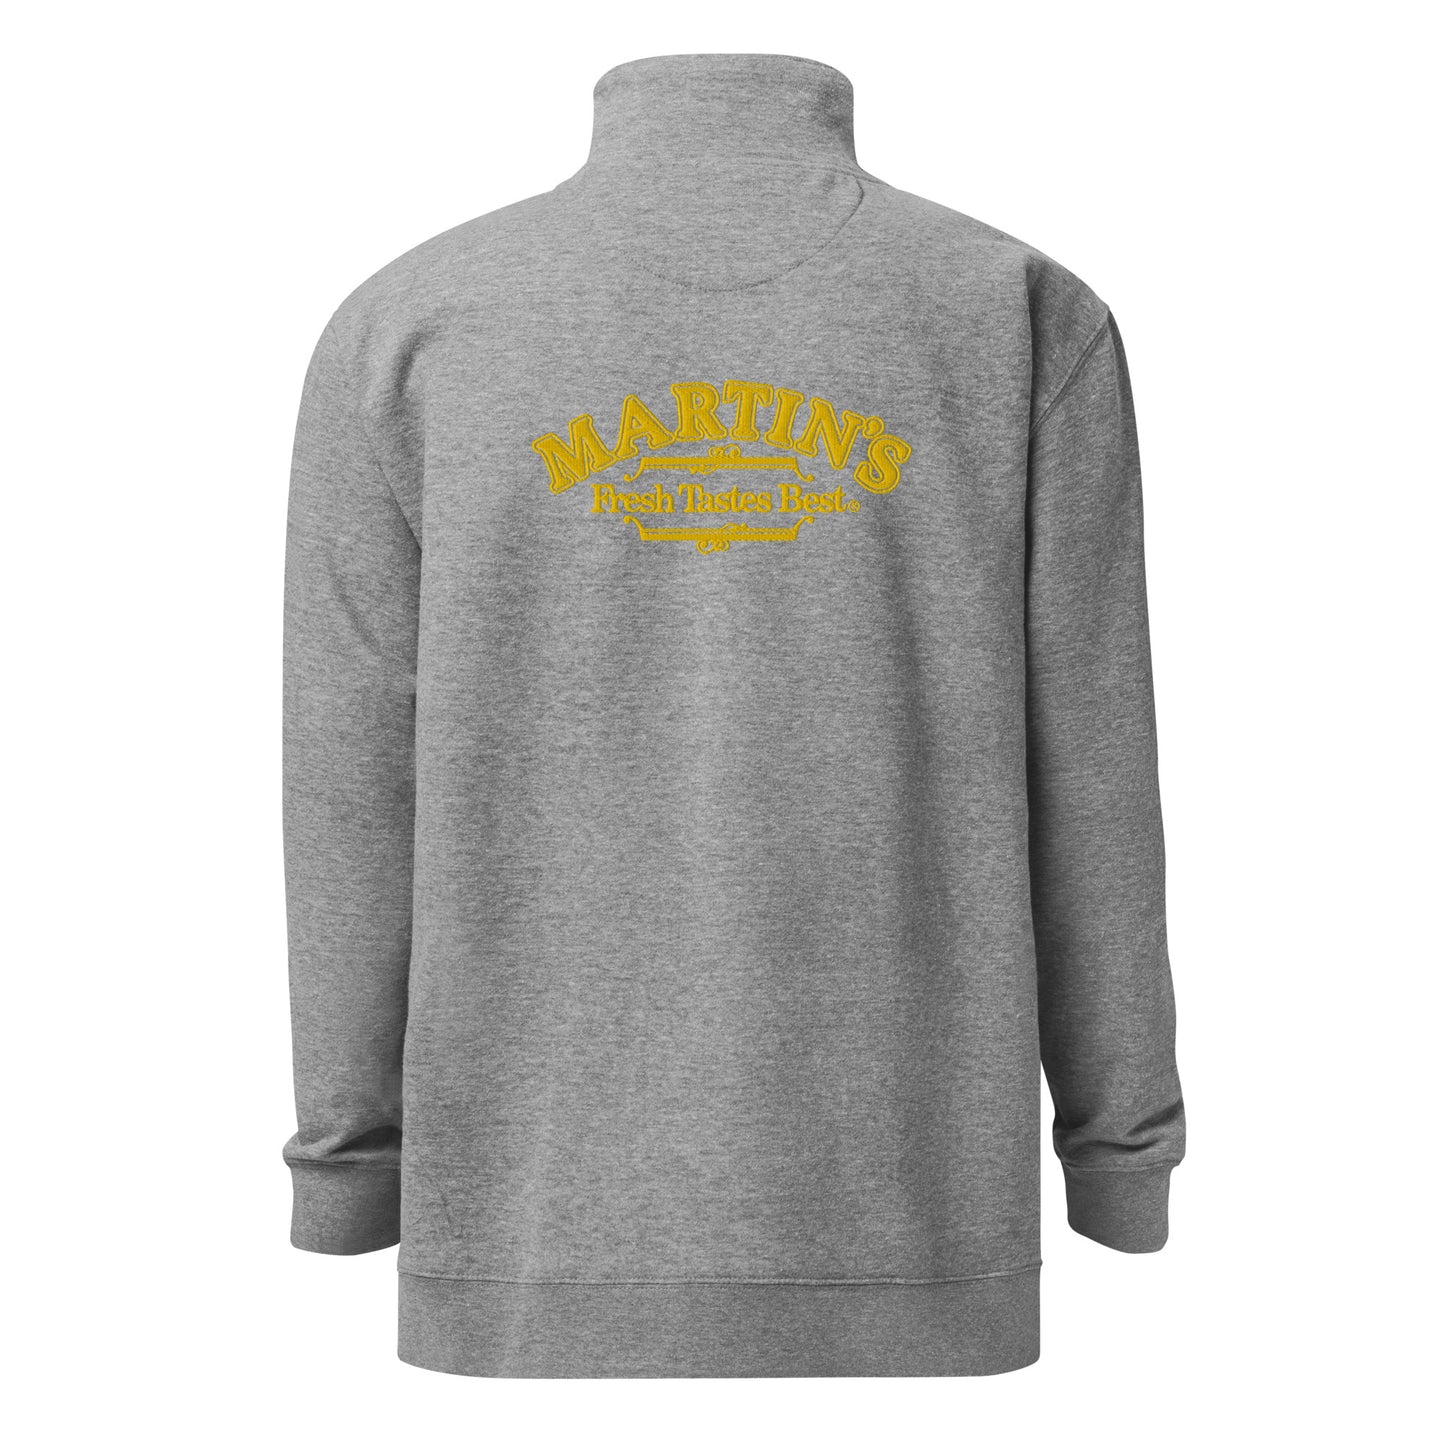 Embroidered Logo Fleece Pullover - Gold